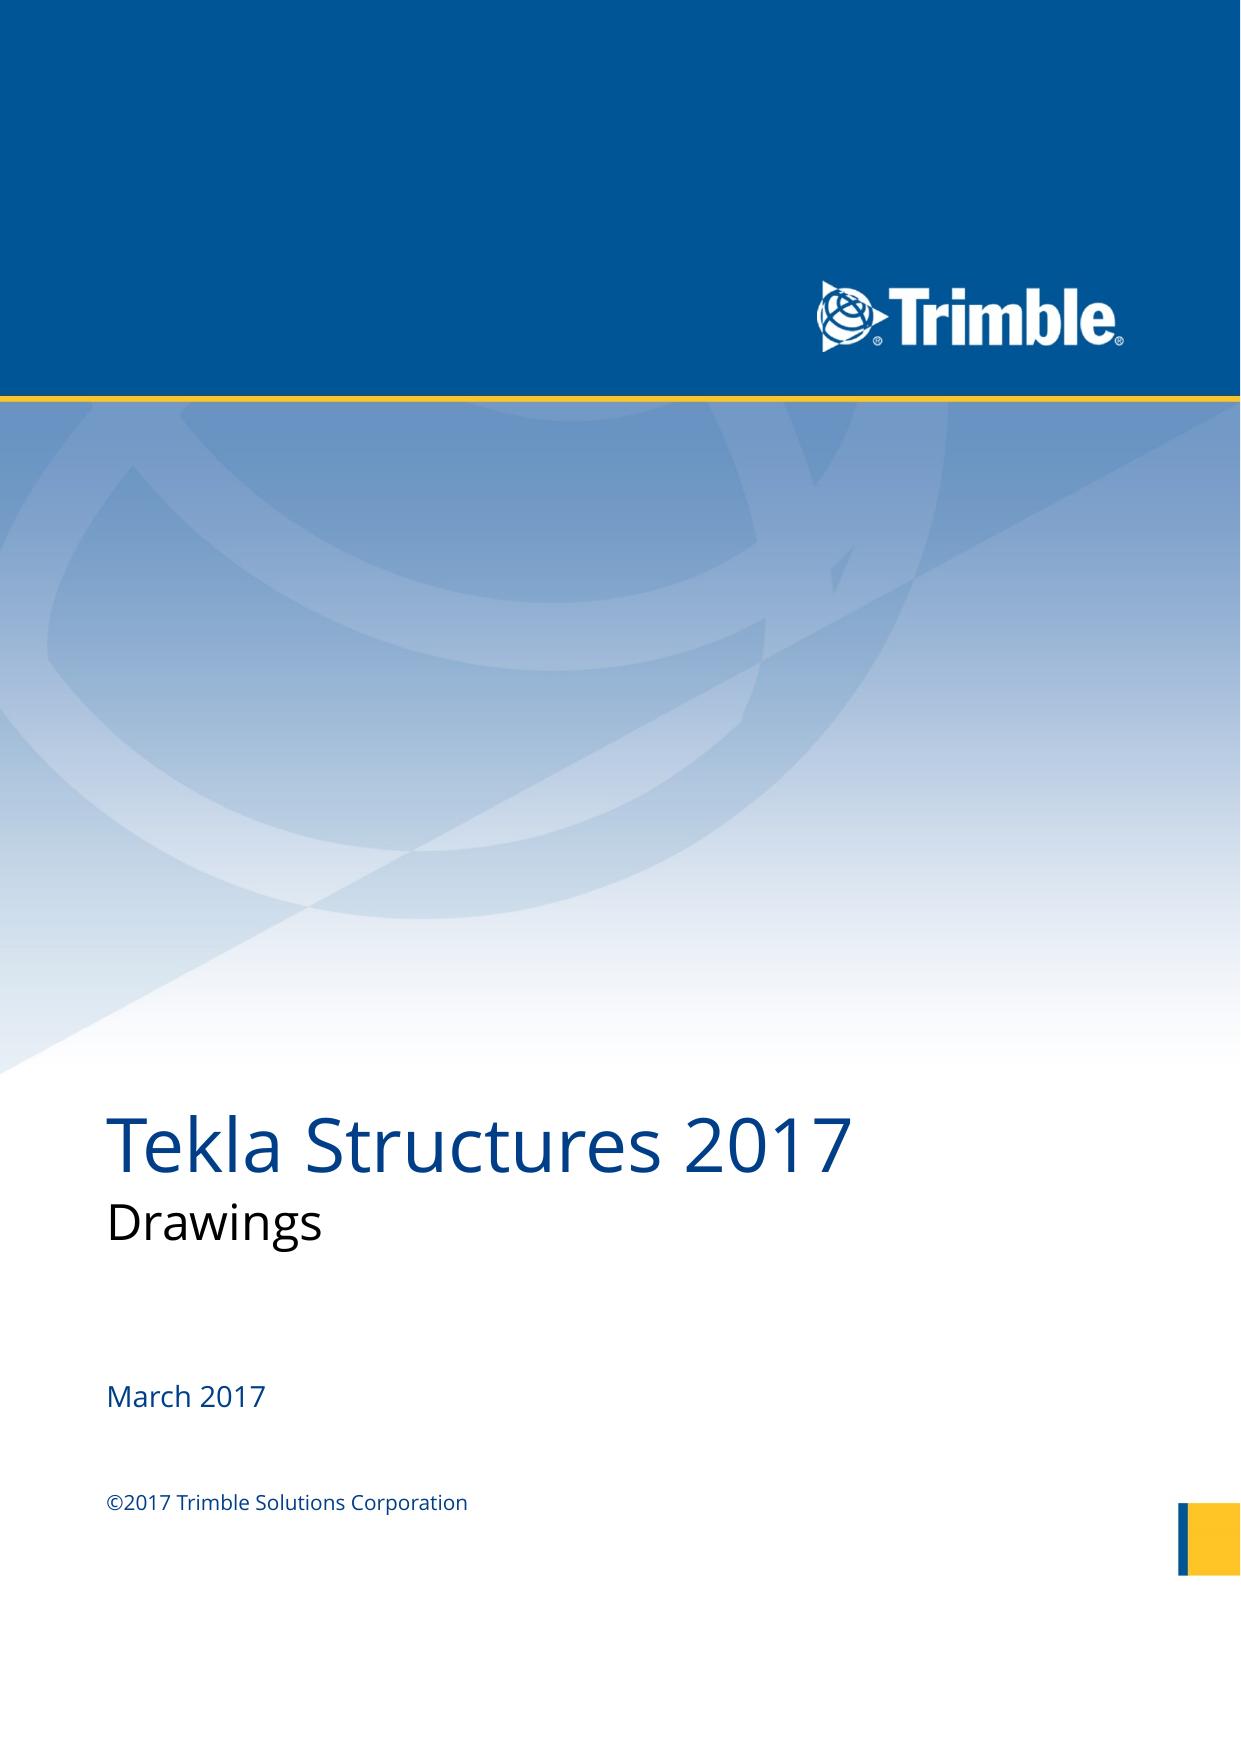 Drawings in Tekla Structures